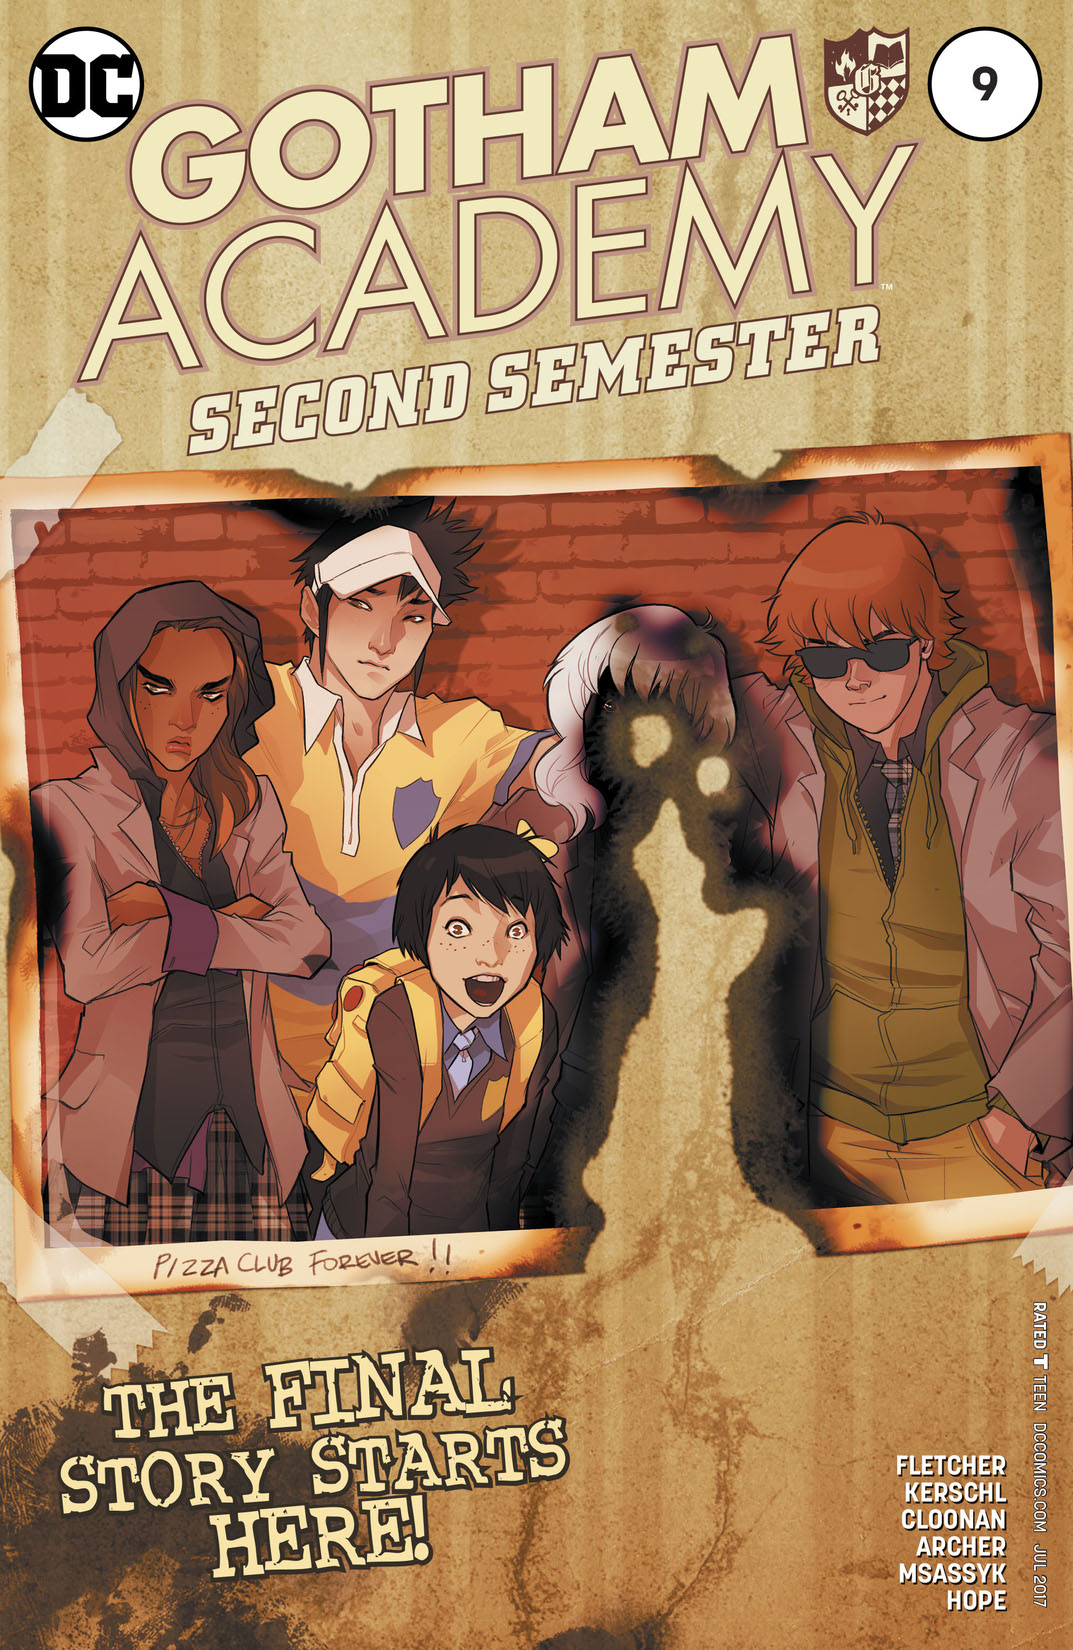 Gotham Academy: Second Semester #9 preview images